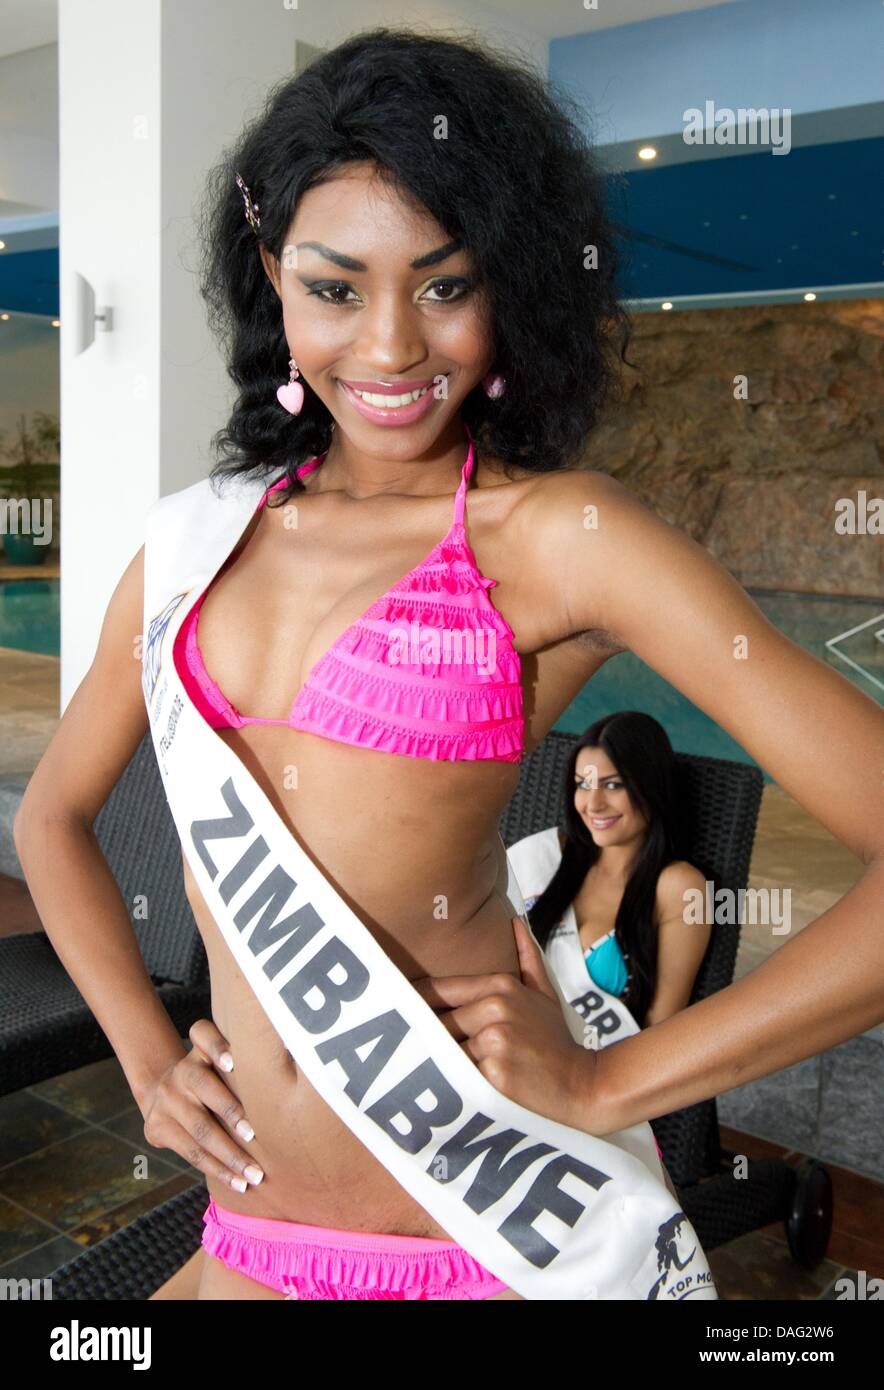 Juliete de Pieri representing Brazil (R) and Venessa Sibanda representing Zimbabwe (L) pose during photo call on the '18th Top Model of the World' in Balm, Germany, 14 March 2011. More than 40 women compete for the title and a contract with World Beauty Organisation at the beauty pageant on 16 March. Photo: STEFAN SAUER Stock Photo